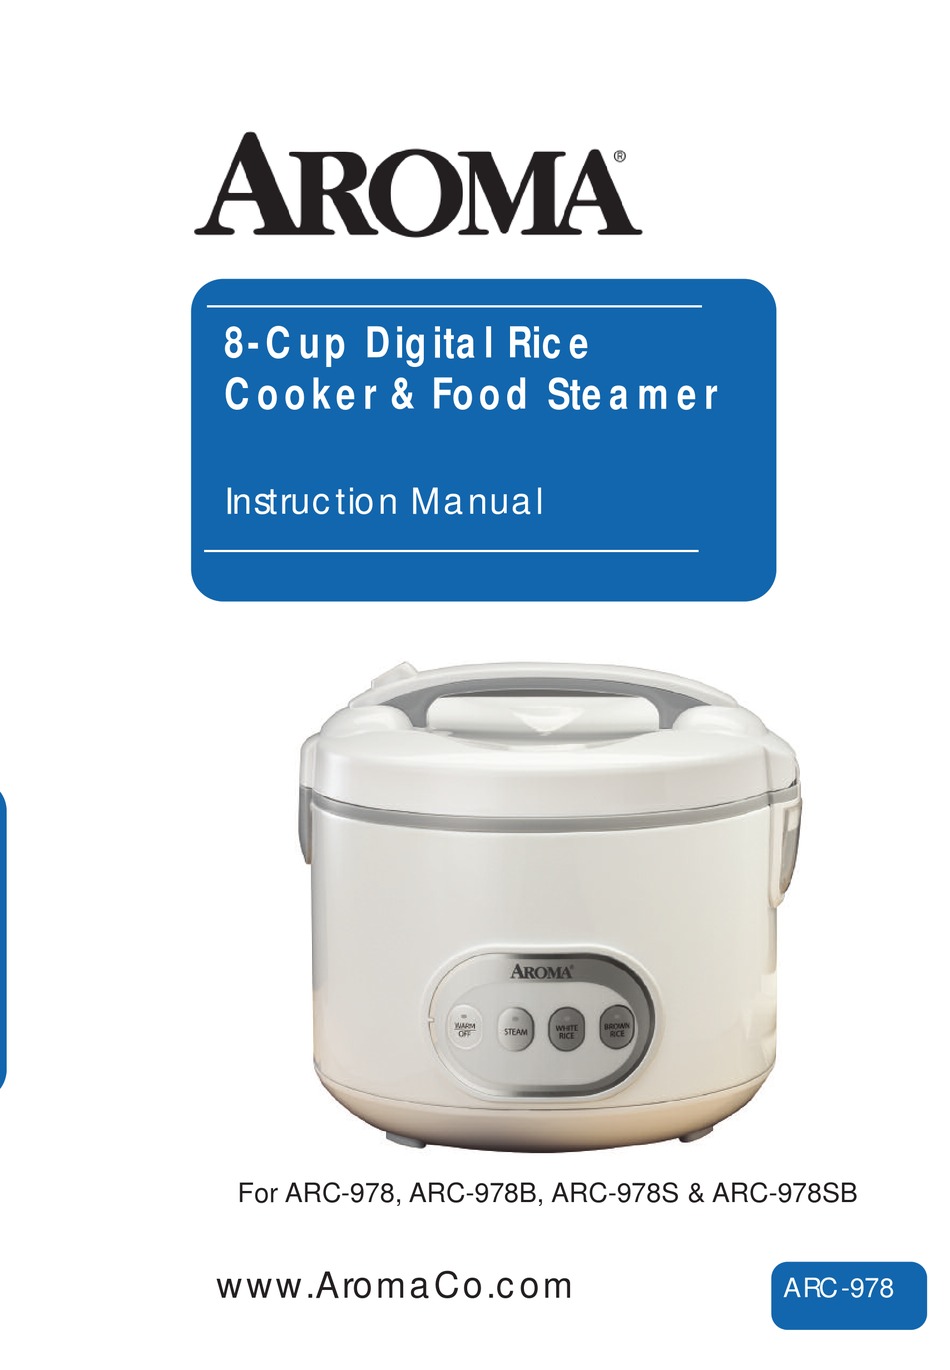 AROMA ARC-914S 4-Cup Cool-Touch Rice Cooker Instruction Manual